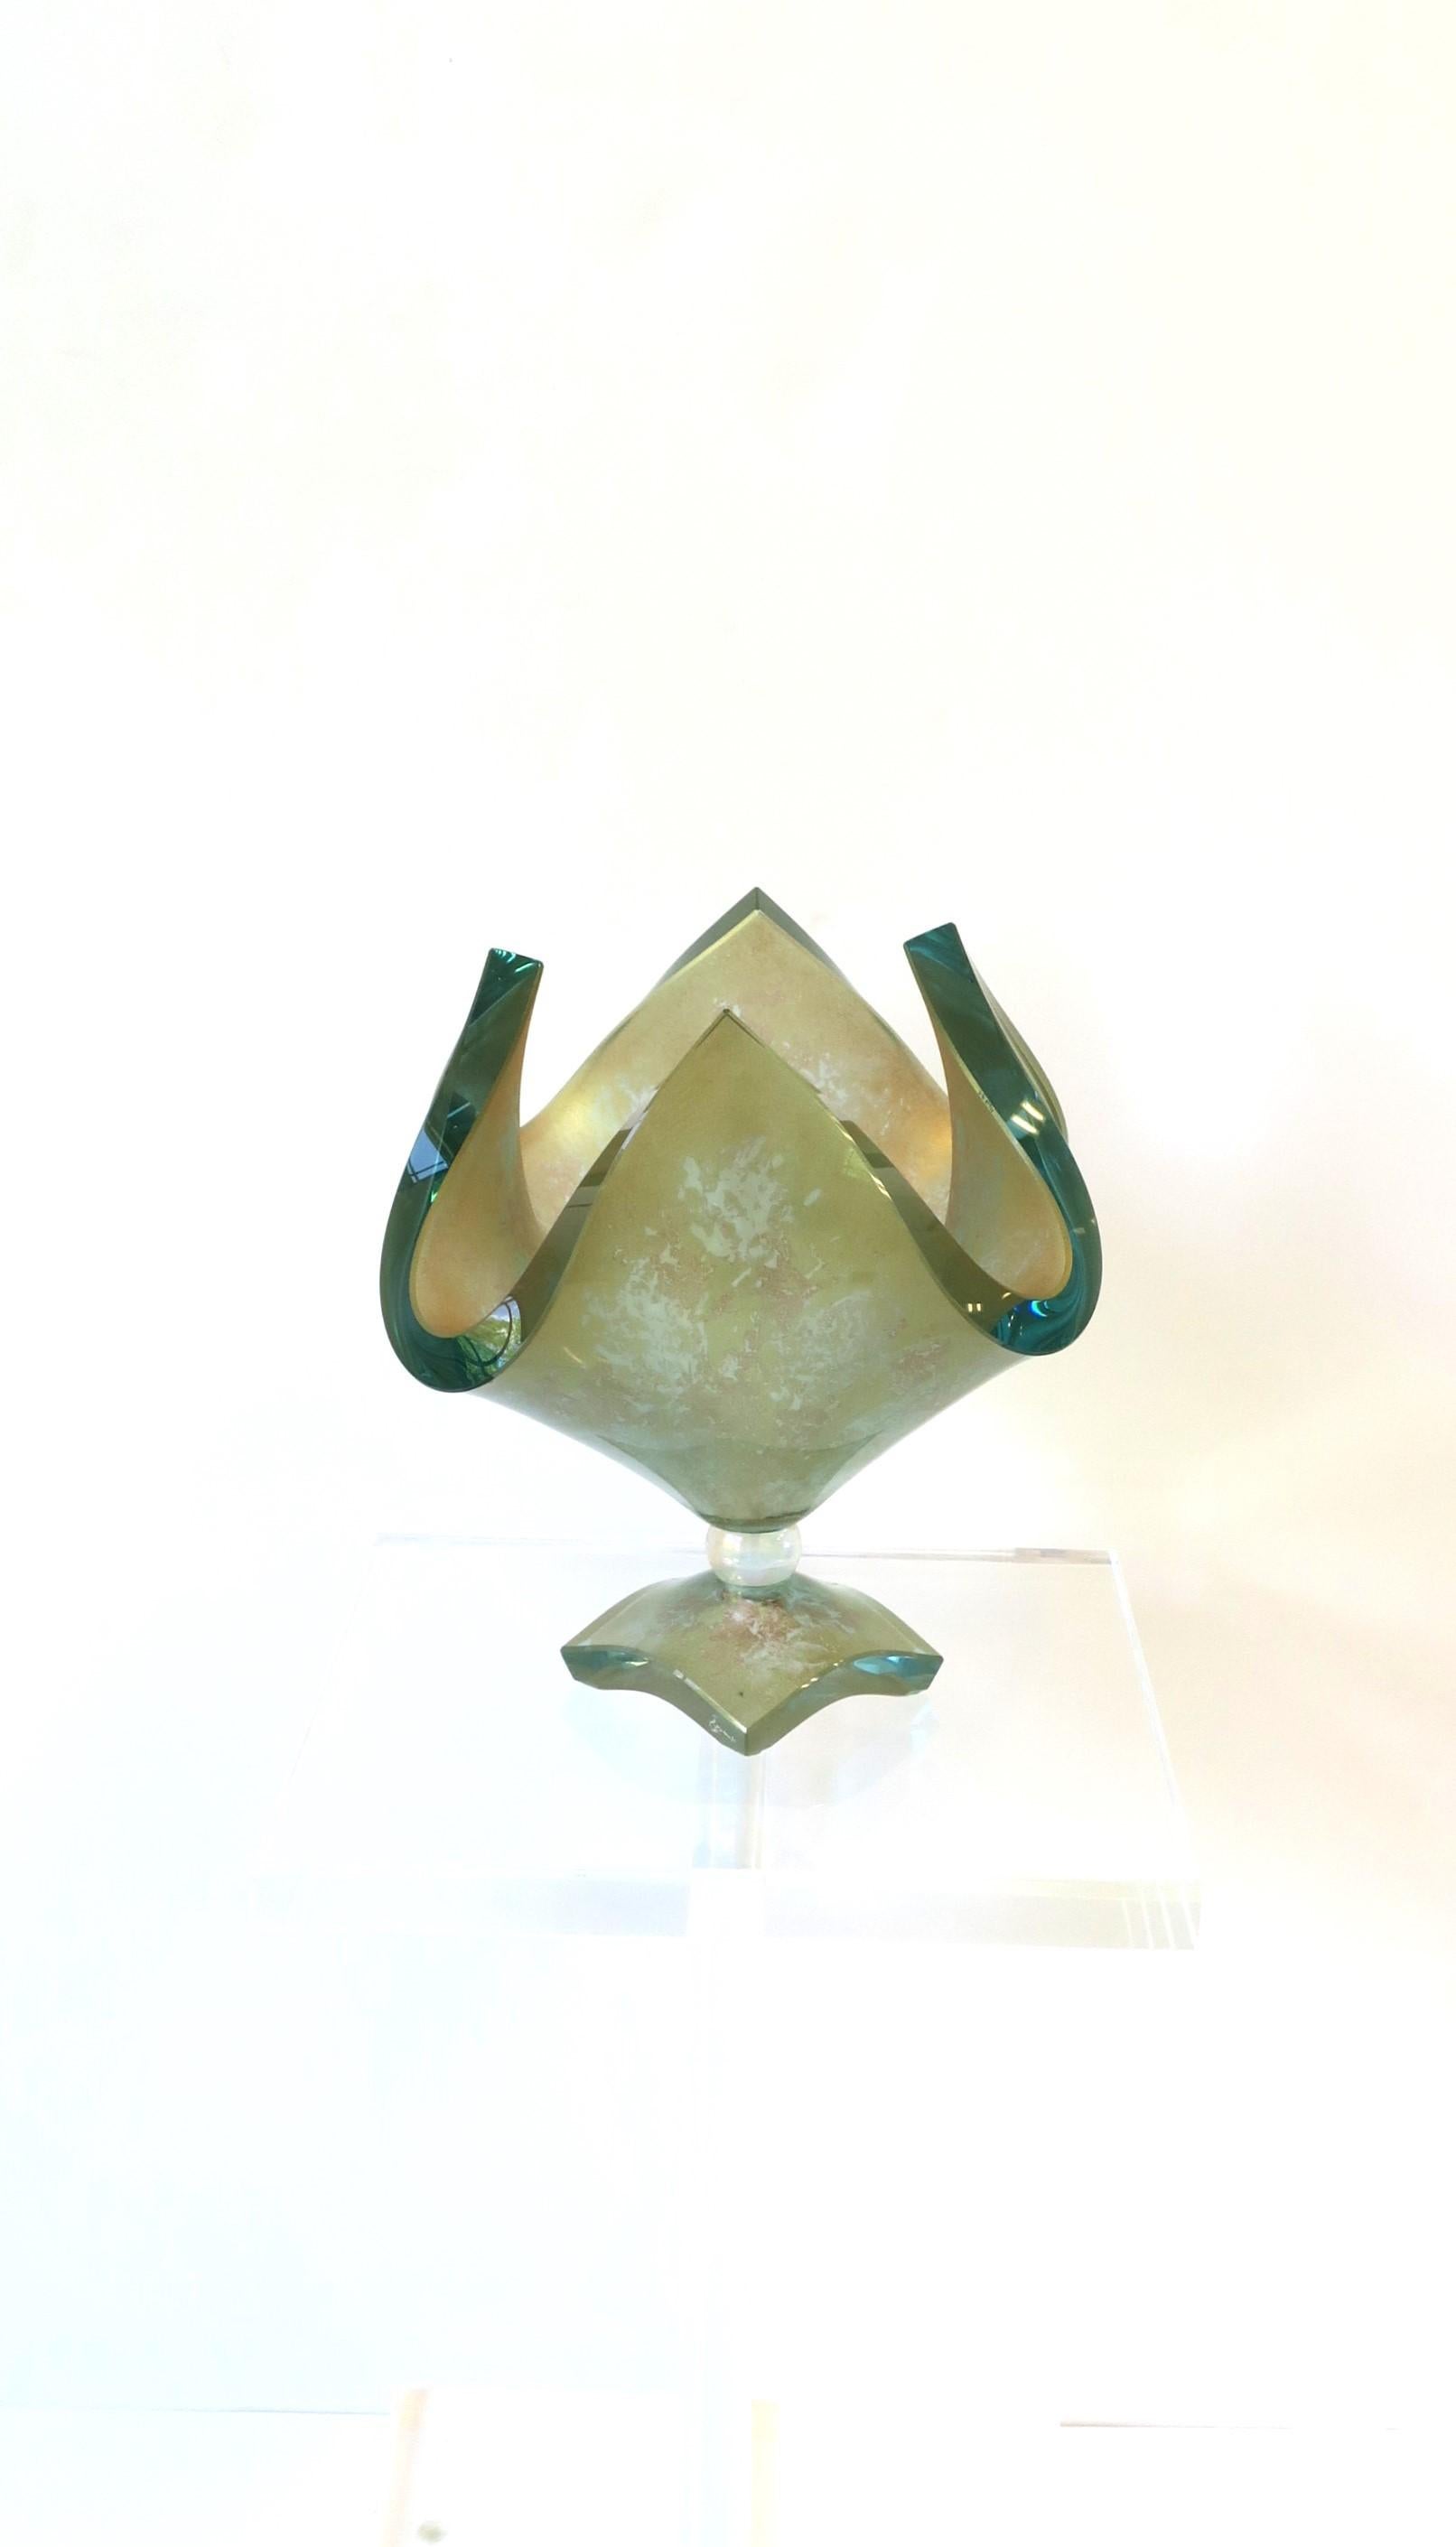 A very beautiful and substantial Italian modern art glass handkerchief vase vessel compote sculpture, circa mid-20th century, Italy. Glass thickness is substantial as shown. Interior is decorated with matte gold and copper gilt. Signed at base as